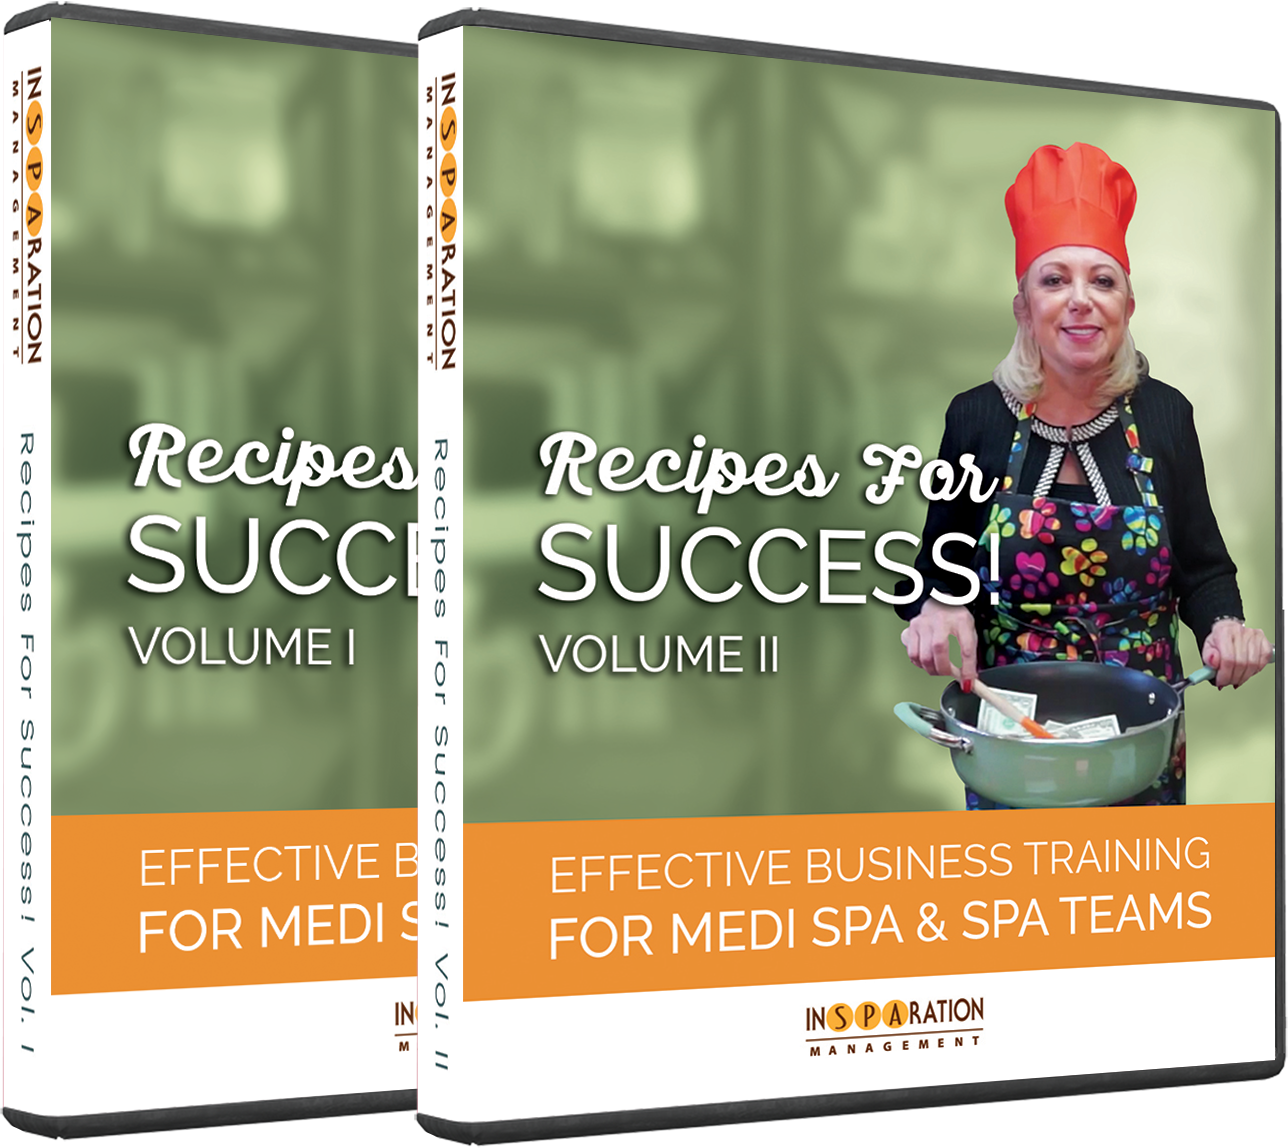 Vaccine: Recipes for Success. Over 20 modules, 20 hours of team training to help you transform your business and your productivity.